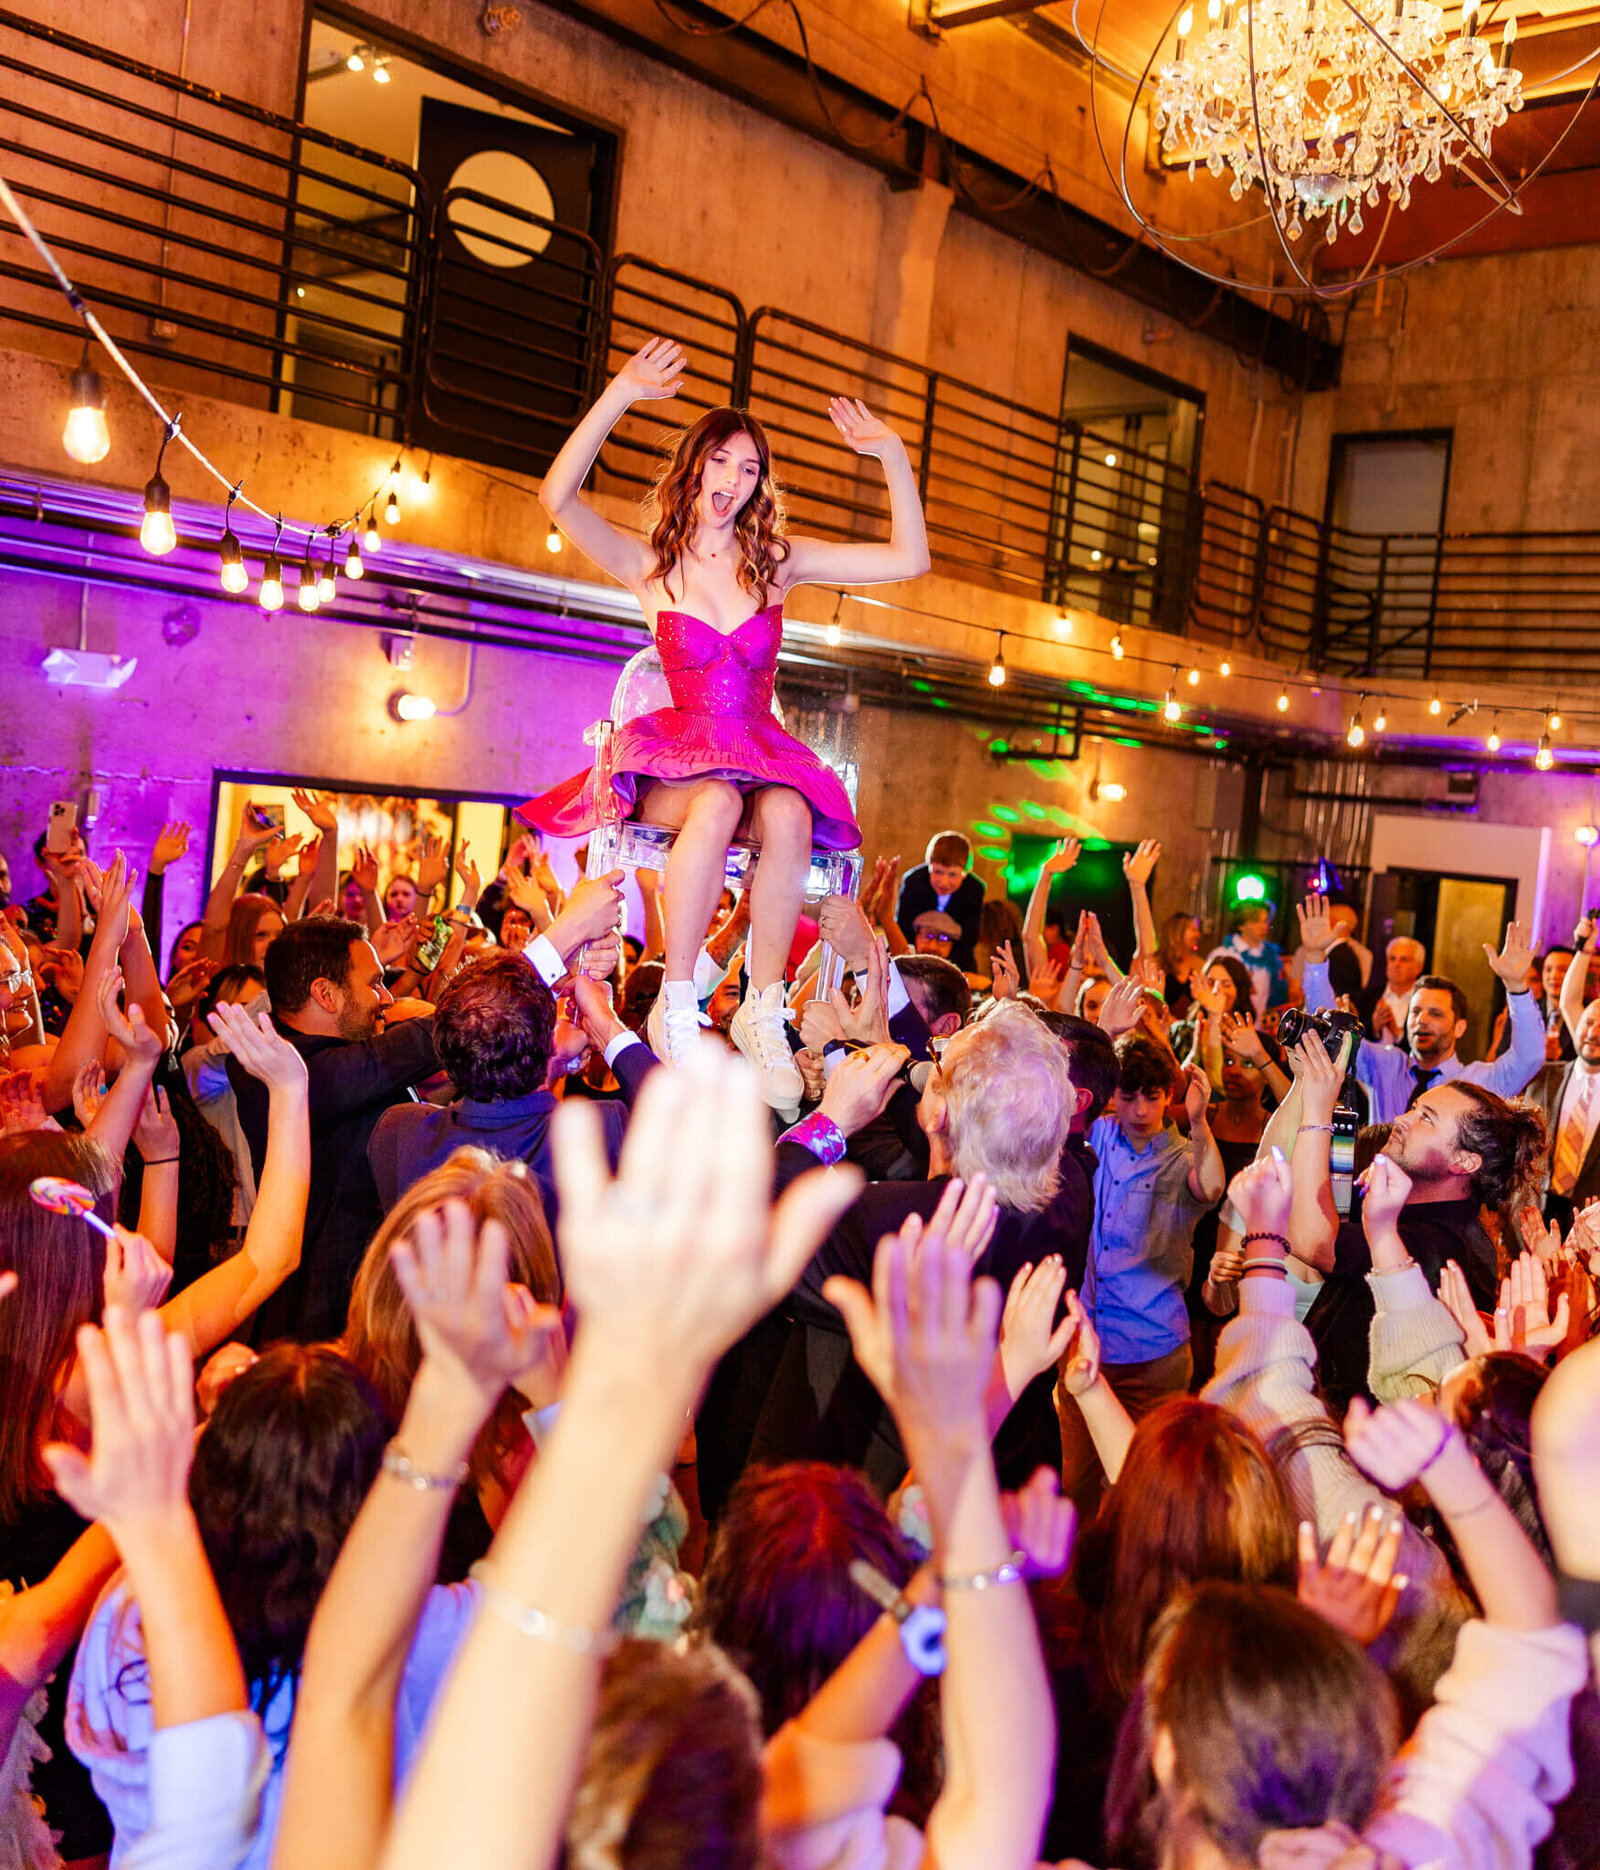 A teenage girl celebrates and dances while sitting on a lifted chair in the middle of a crowded dance floor